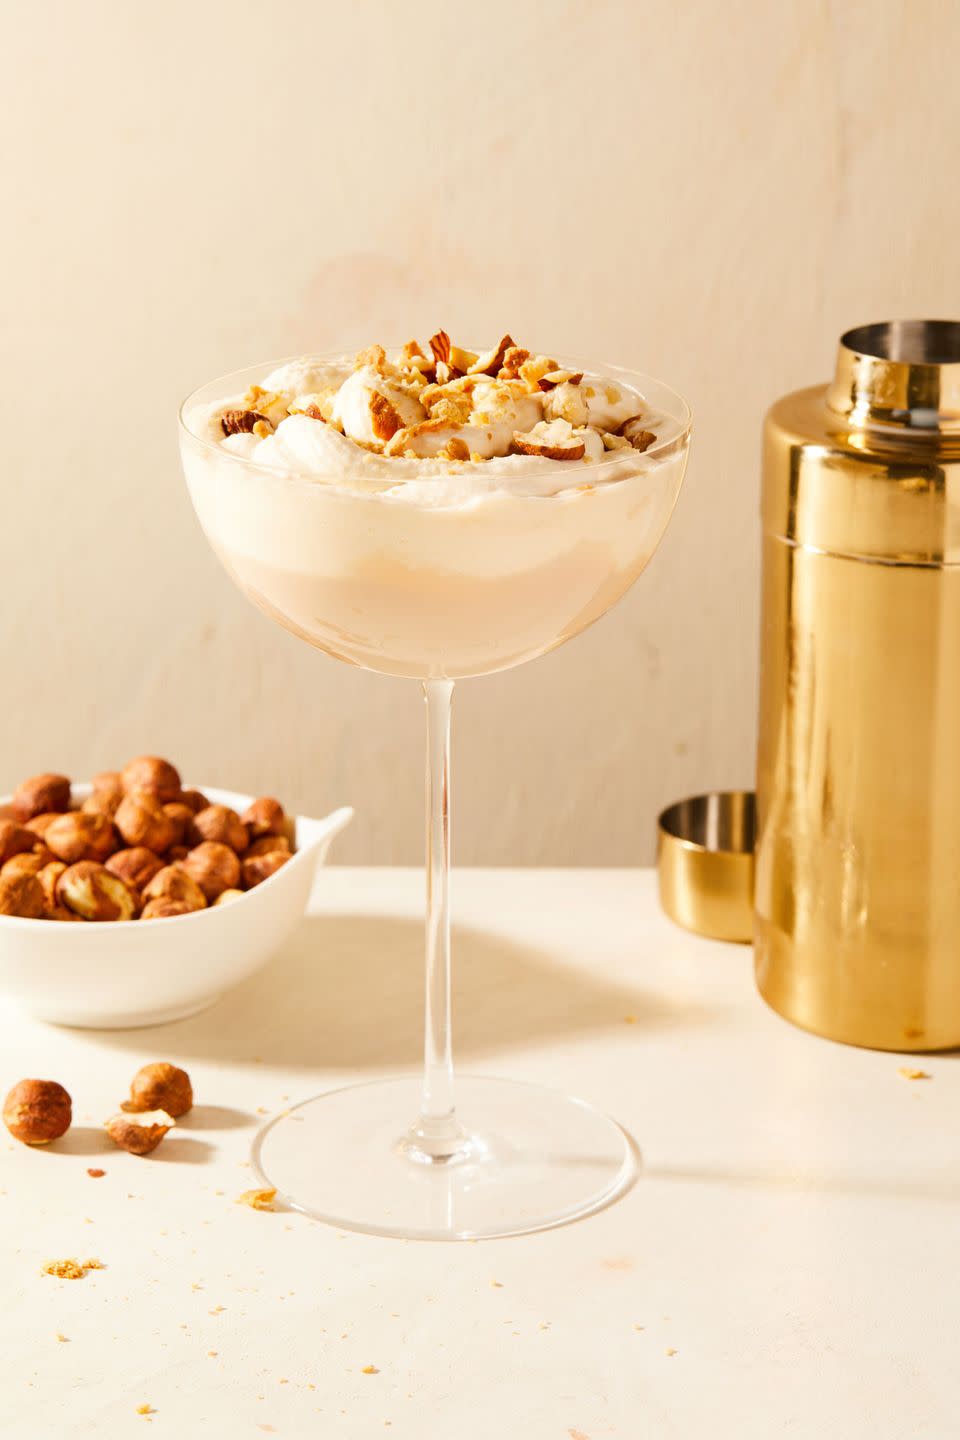 <p>The sweetness and subtle nuttiness of the hazelnut liqueur Frangelico is the perfect partner to rich Irish cream. The almost inevitable <a href="https://www.delish.com/cooking/recipe-ideas/a24492200/how-to-make-homemade-whipped-cream/" rel="nofollow noopener" target="_blank" data-ylk="slk:whipped cream" class="link ">whipped cream</a> mustache that follows is highly worth it. </p><p>Get the <strong><a href="https://www.delish.com/cooking/recipe-ideas/a35686657/nutty-irishman-recipe/" rel="nofollow noopener" target="_blank" data-ylk="slk:Nutty Irishman recipe" class="link ">Nutty Irishman recipe</a>. </strong></p>